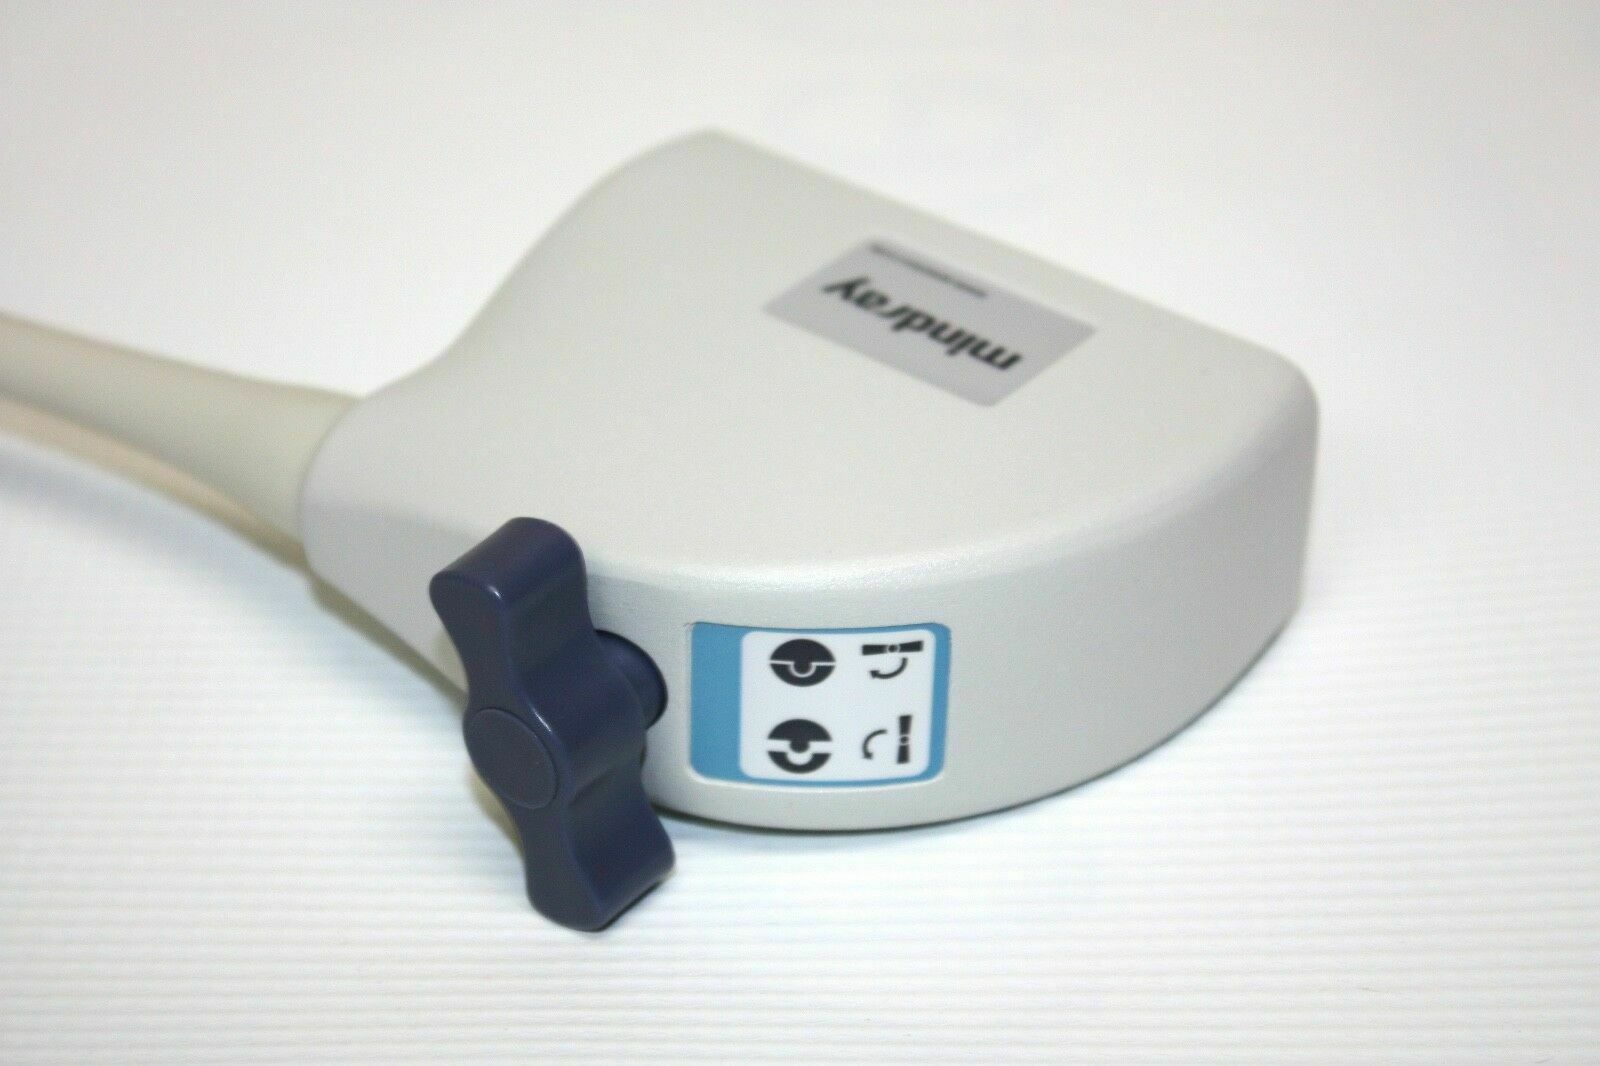 Genuine Mindray 35C50EA Convex Probe, FOR DP-30, DP-50, Z5, & Vet Ultrasounds DIAGNOSTIC ULTRASOUND MACHINES FOR SALE